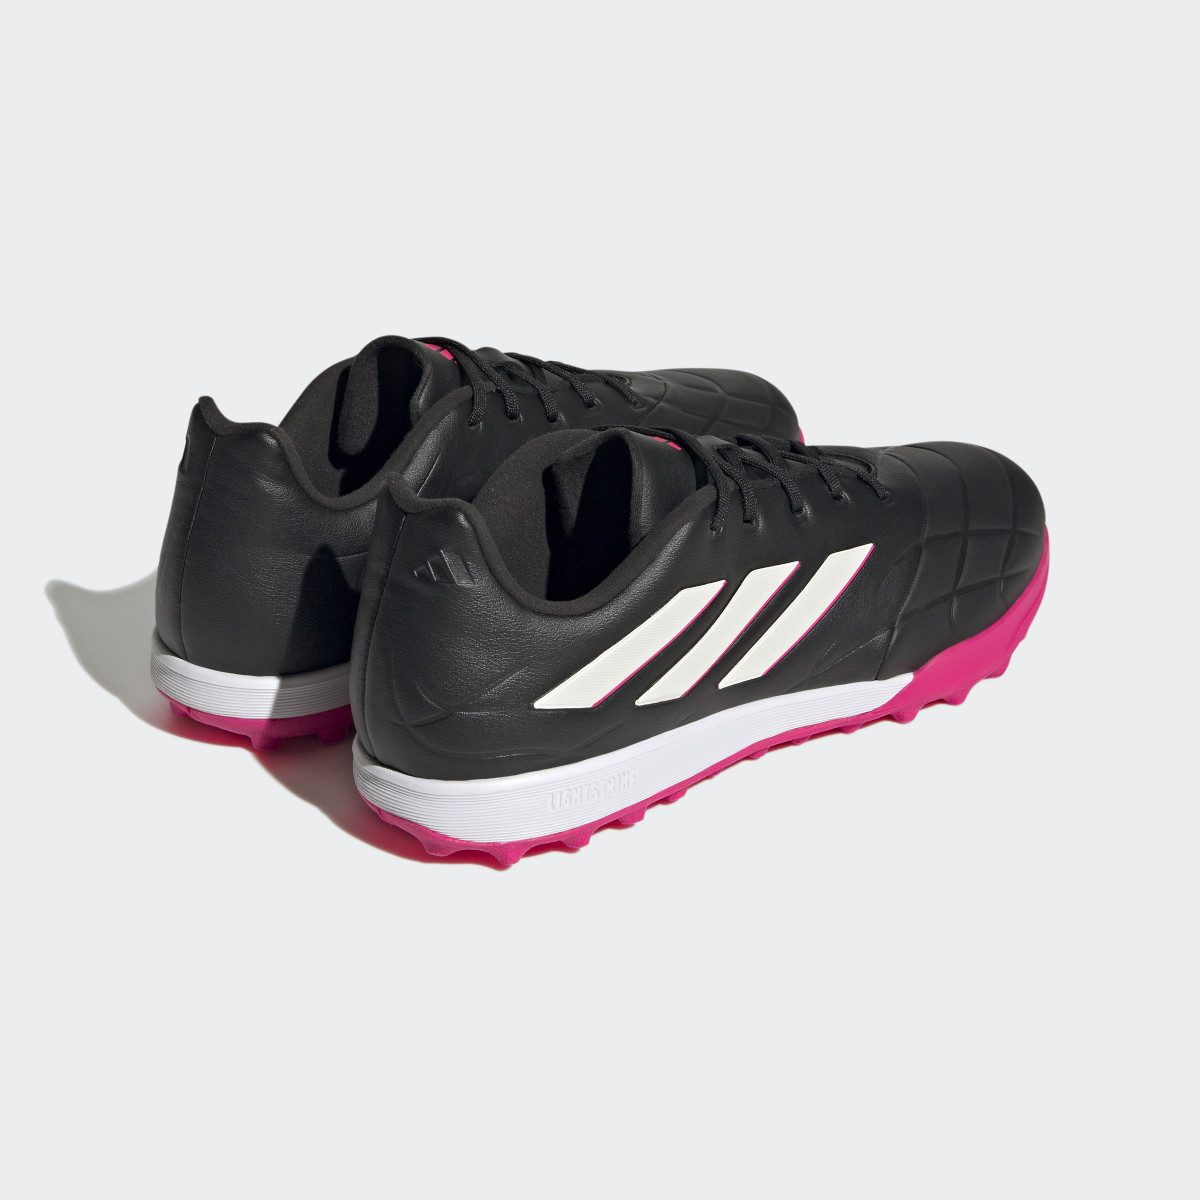 Adidas Copa Pure.3 Turf Boots. 6